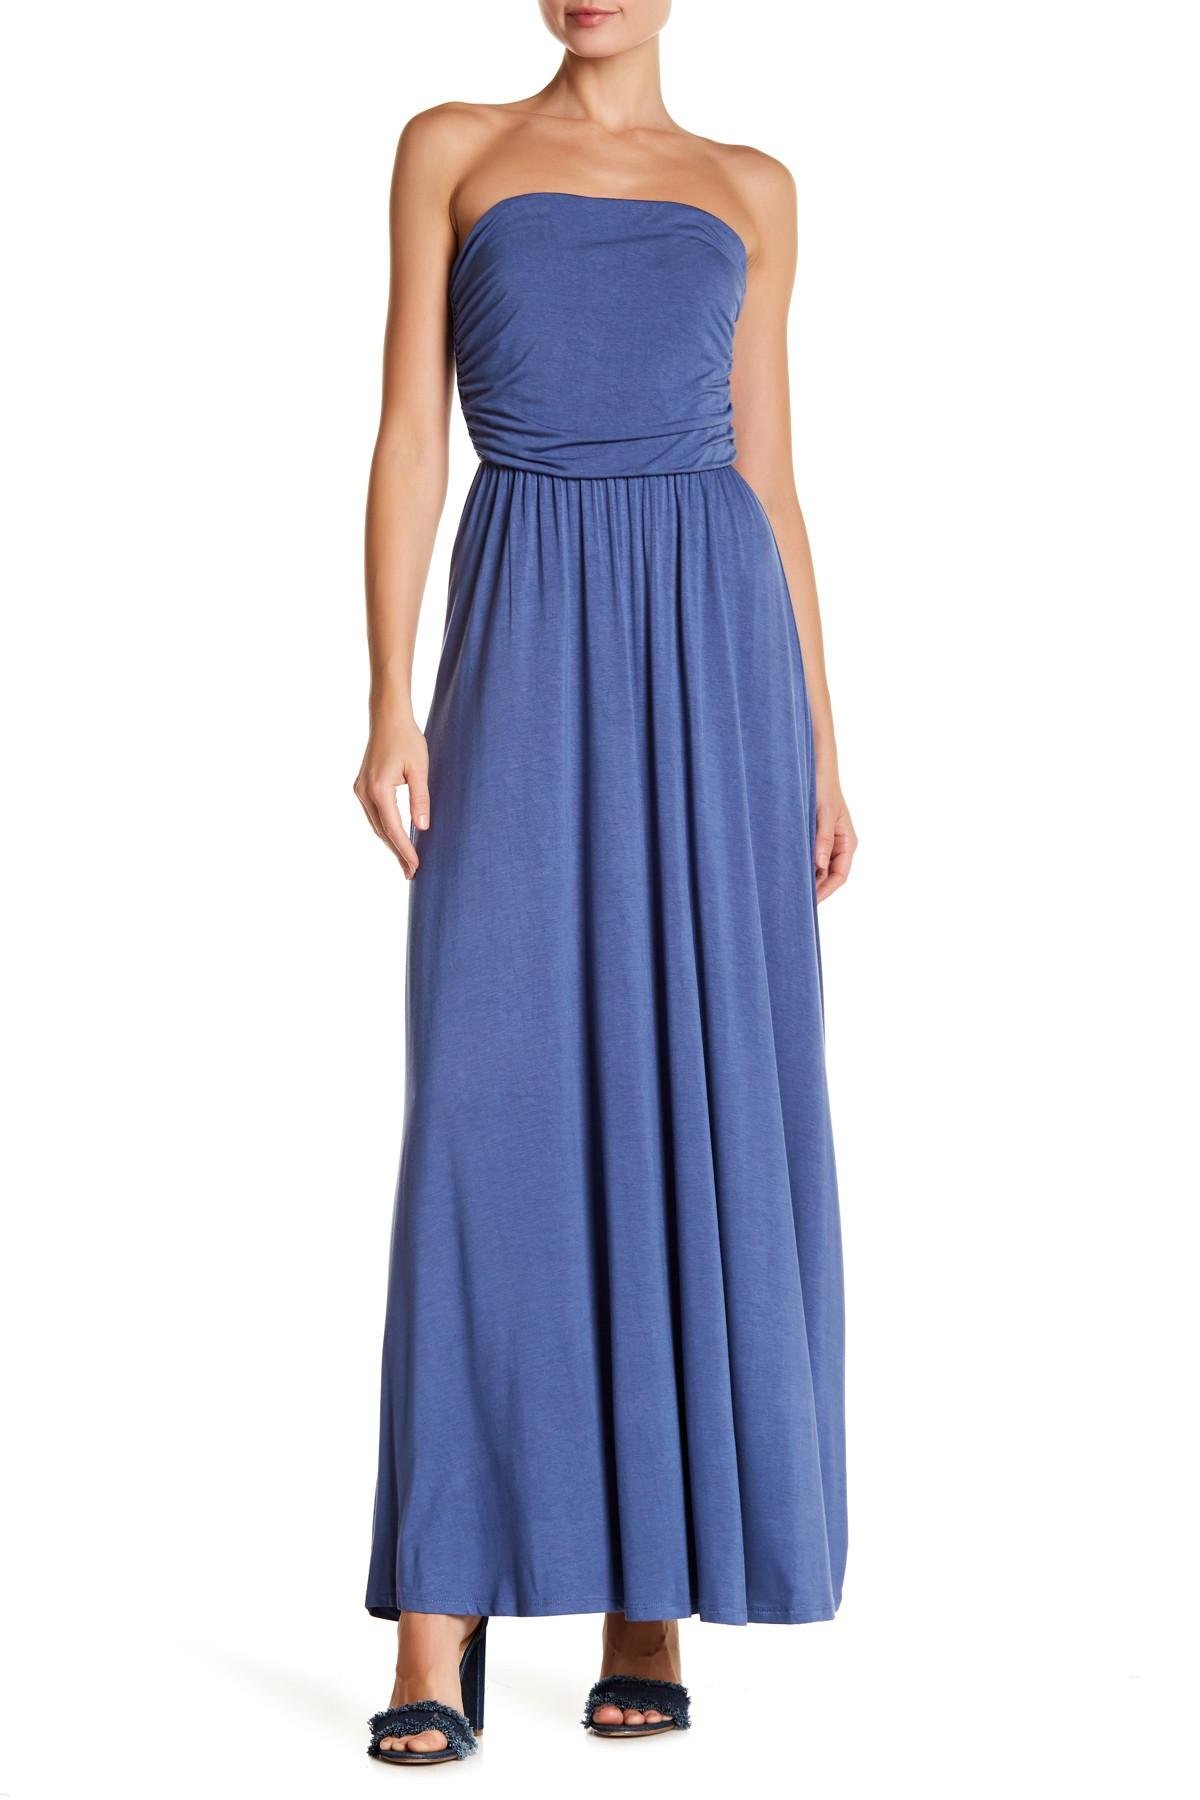 West Kei Strapless Maxi Dress in Blue - Lyst